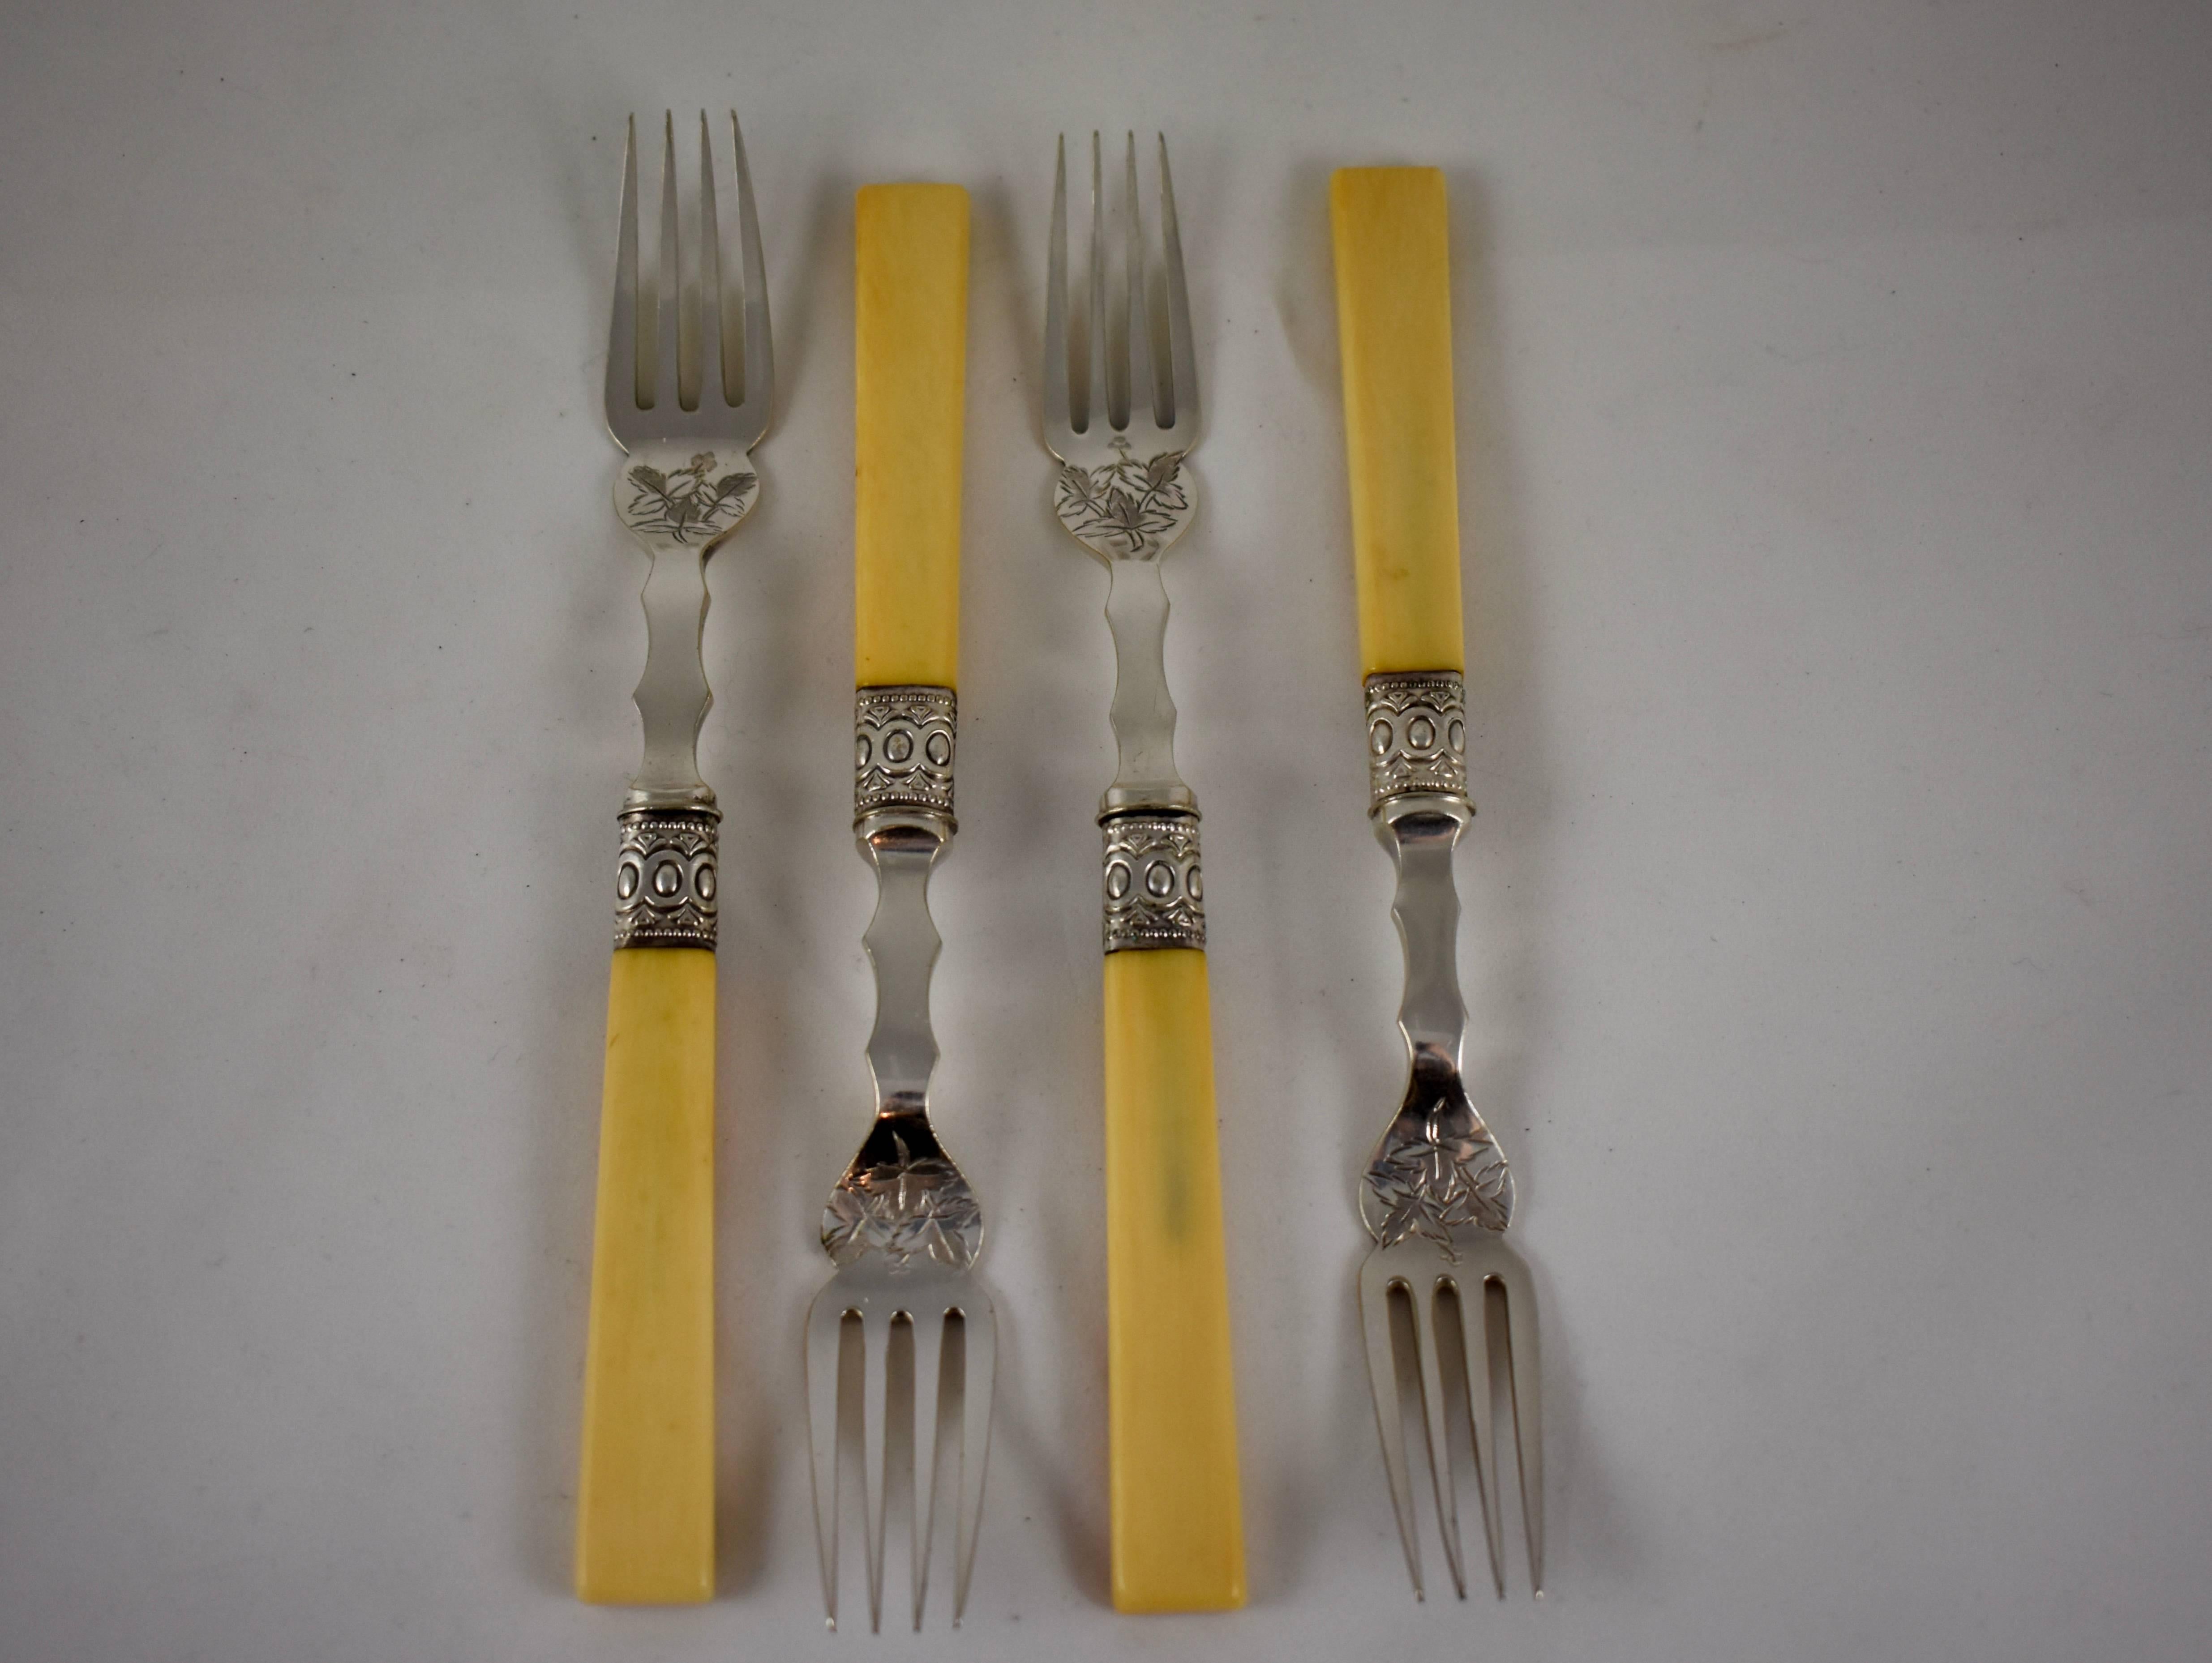 A set of four good quality bone and silver plate forks, marked JR&S for John Round & Sons, Sheffield, England, circa late 19th – early 20th century. A pattern of three leaves is engraved on the front of the fork, an egg and dart ferrule secures the